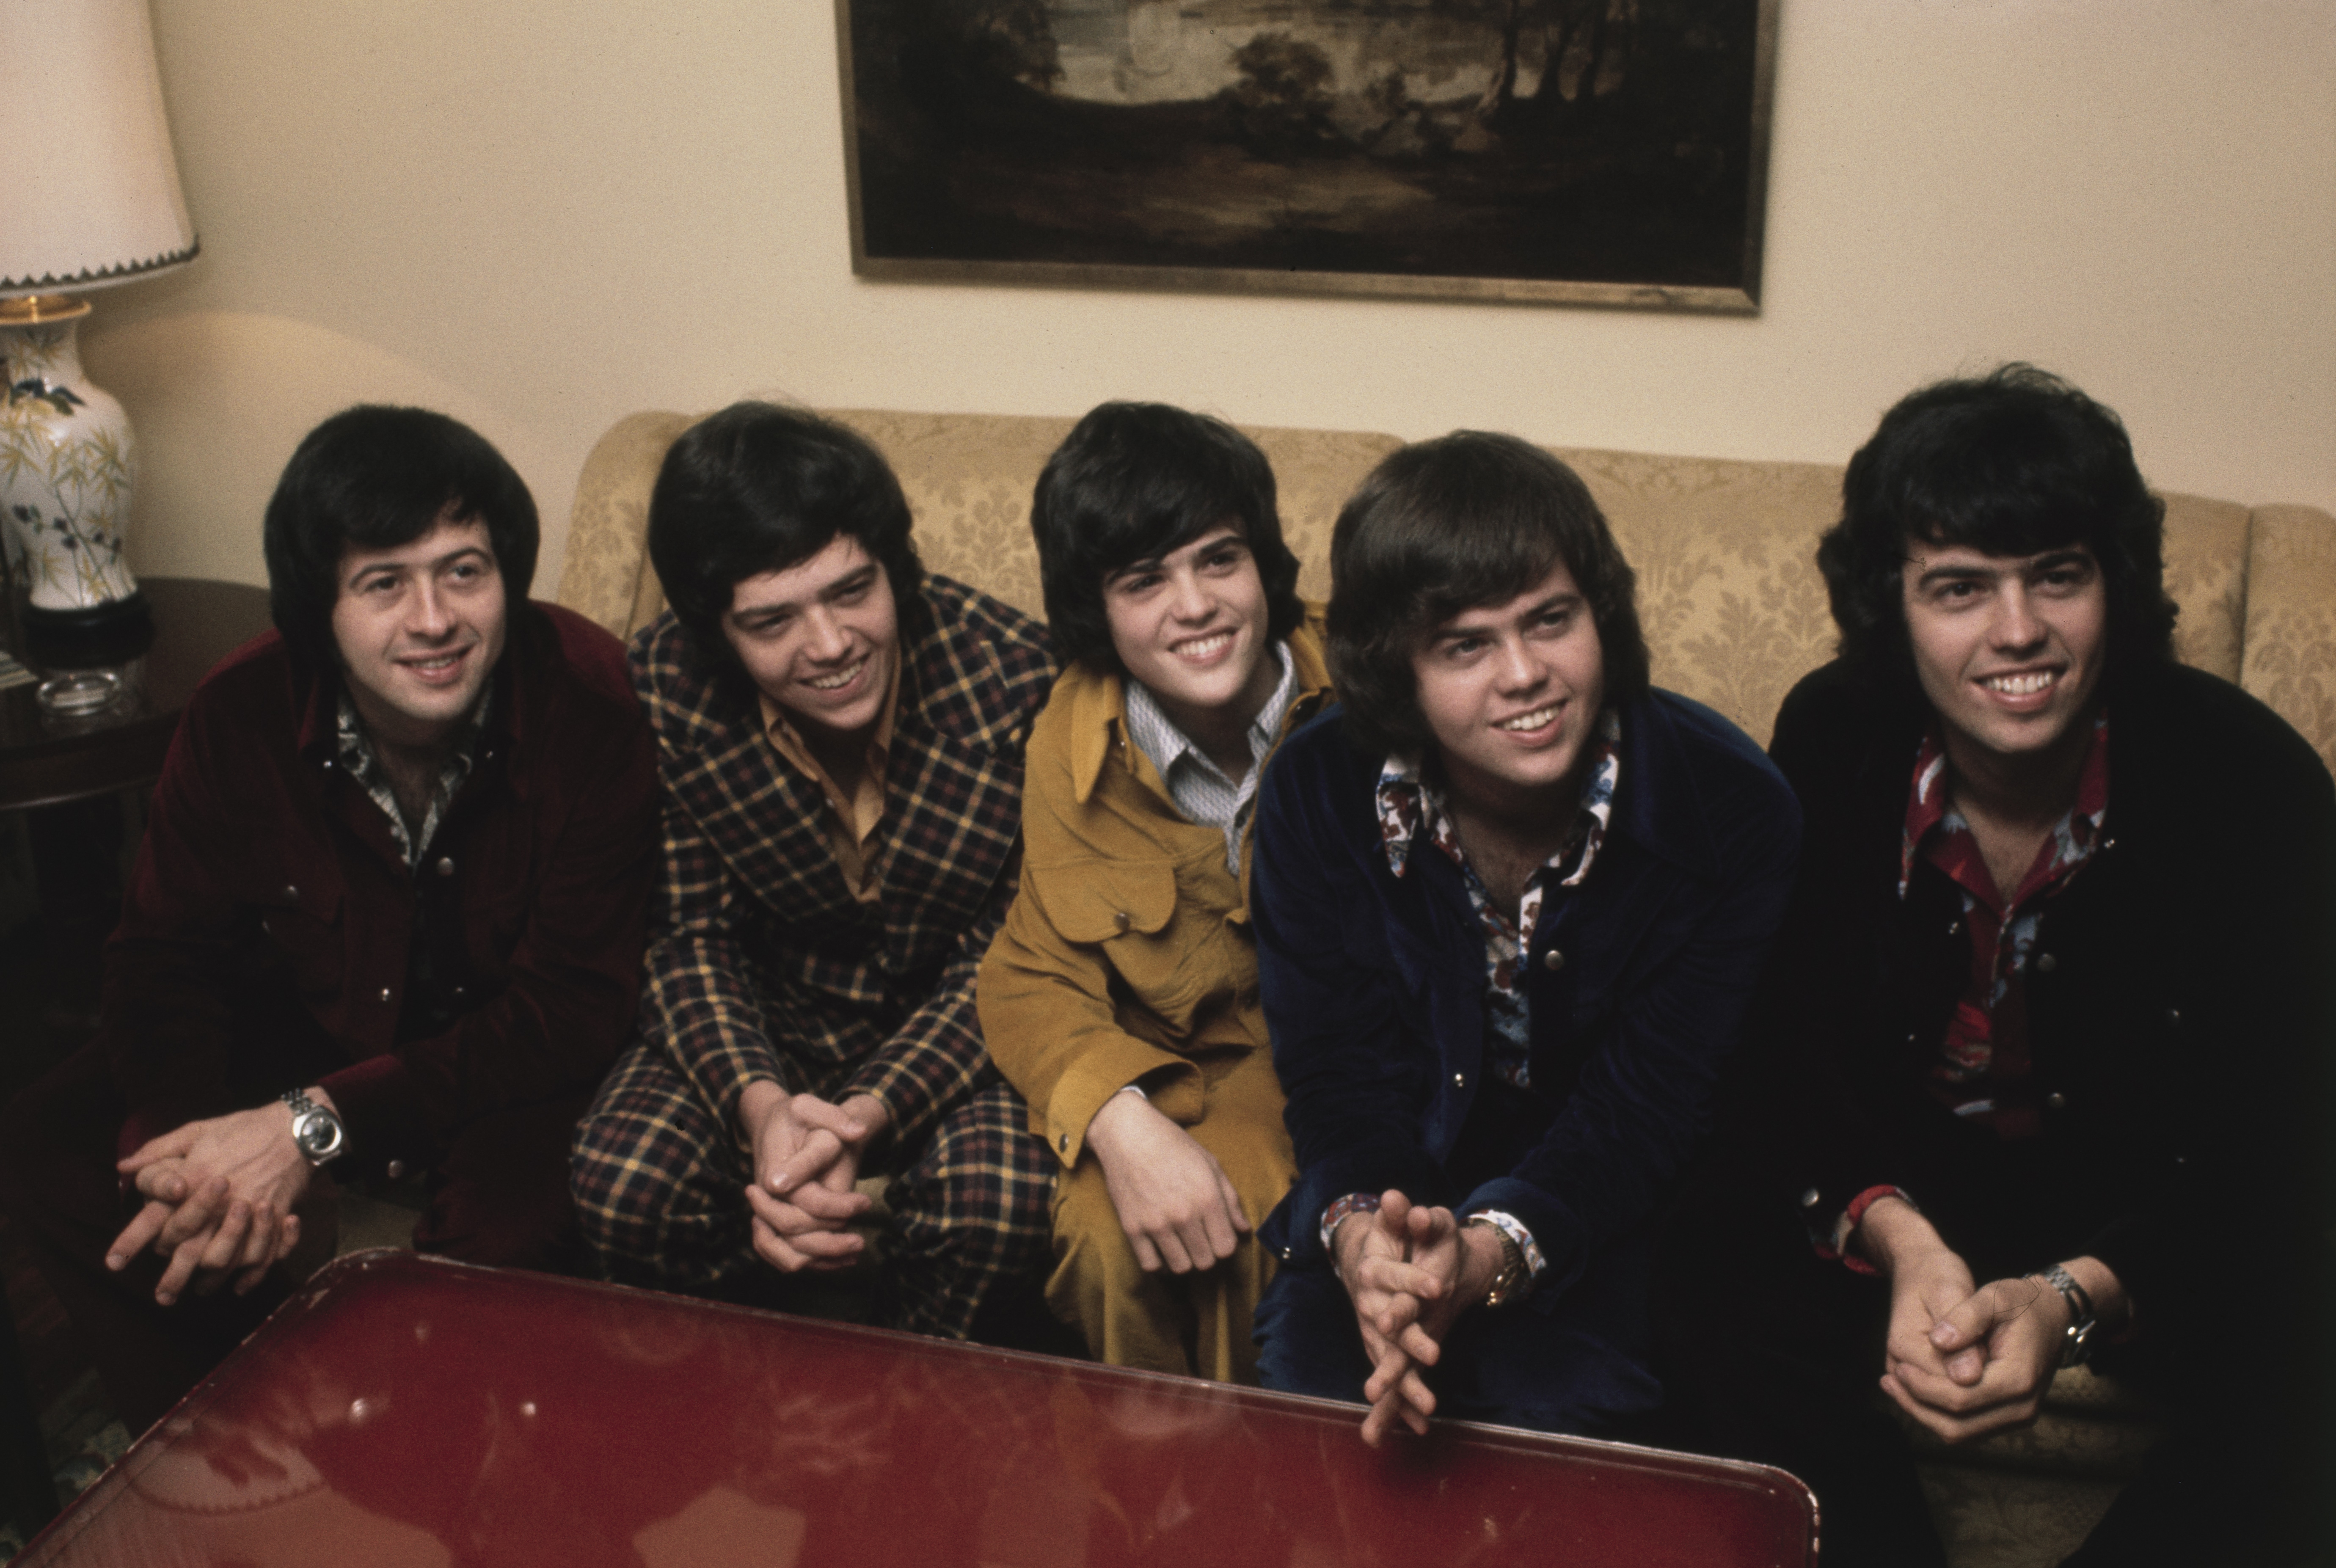 The “Osmonds Brothers” Wayne, Jay, Donny, Merrill, and Alan in London October 29 1972. | Source: Getty Images